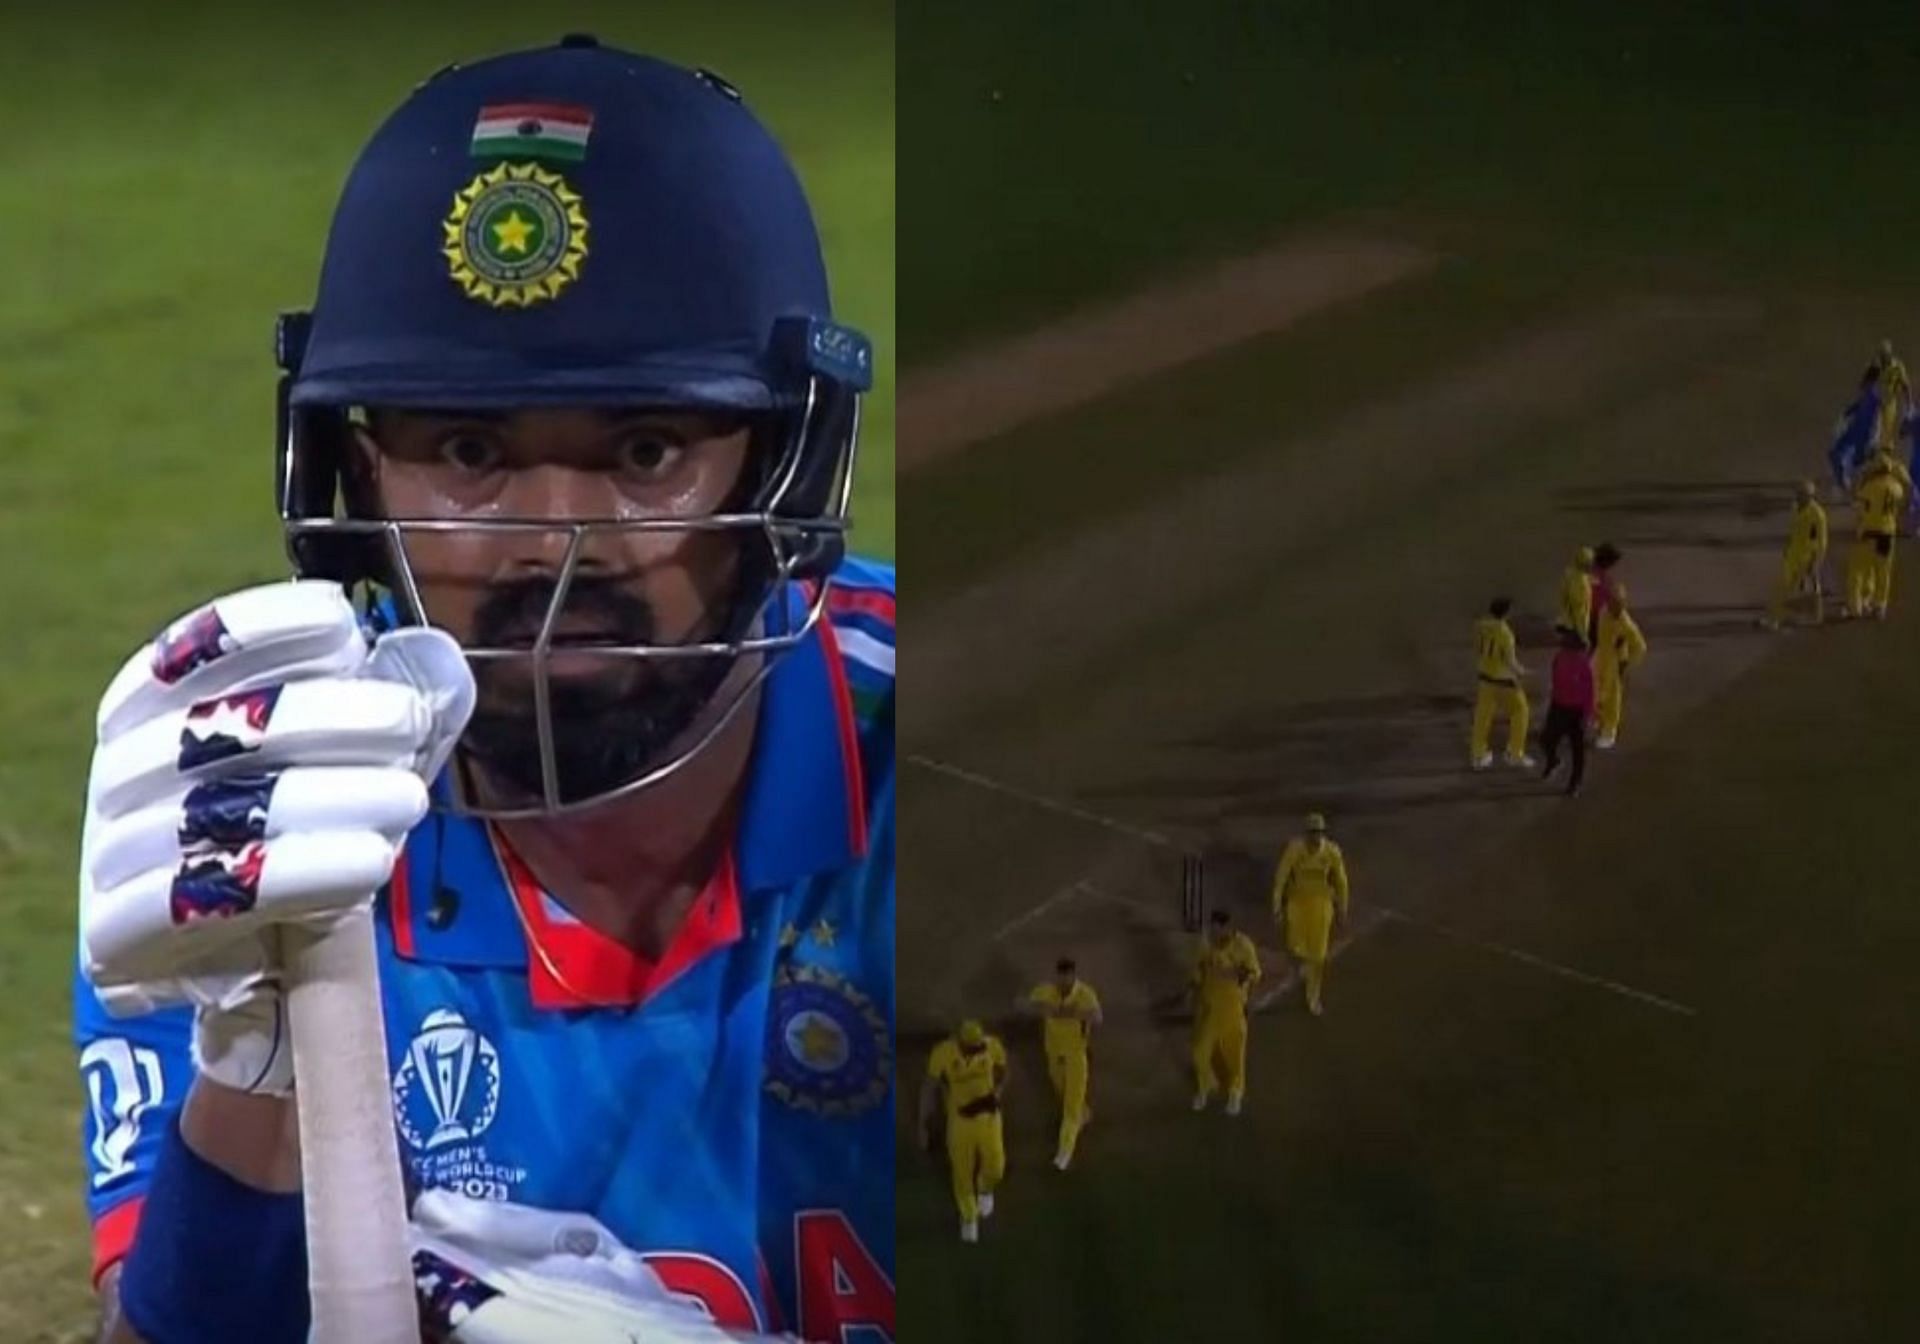 KL Rahul (l) and lights going out after the conclusion of the match (r). 